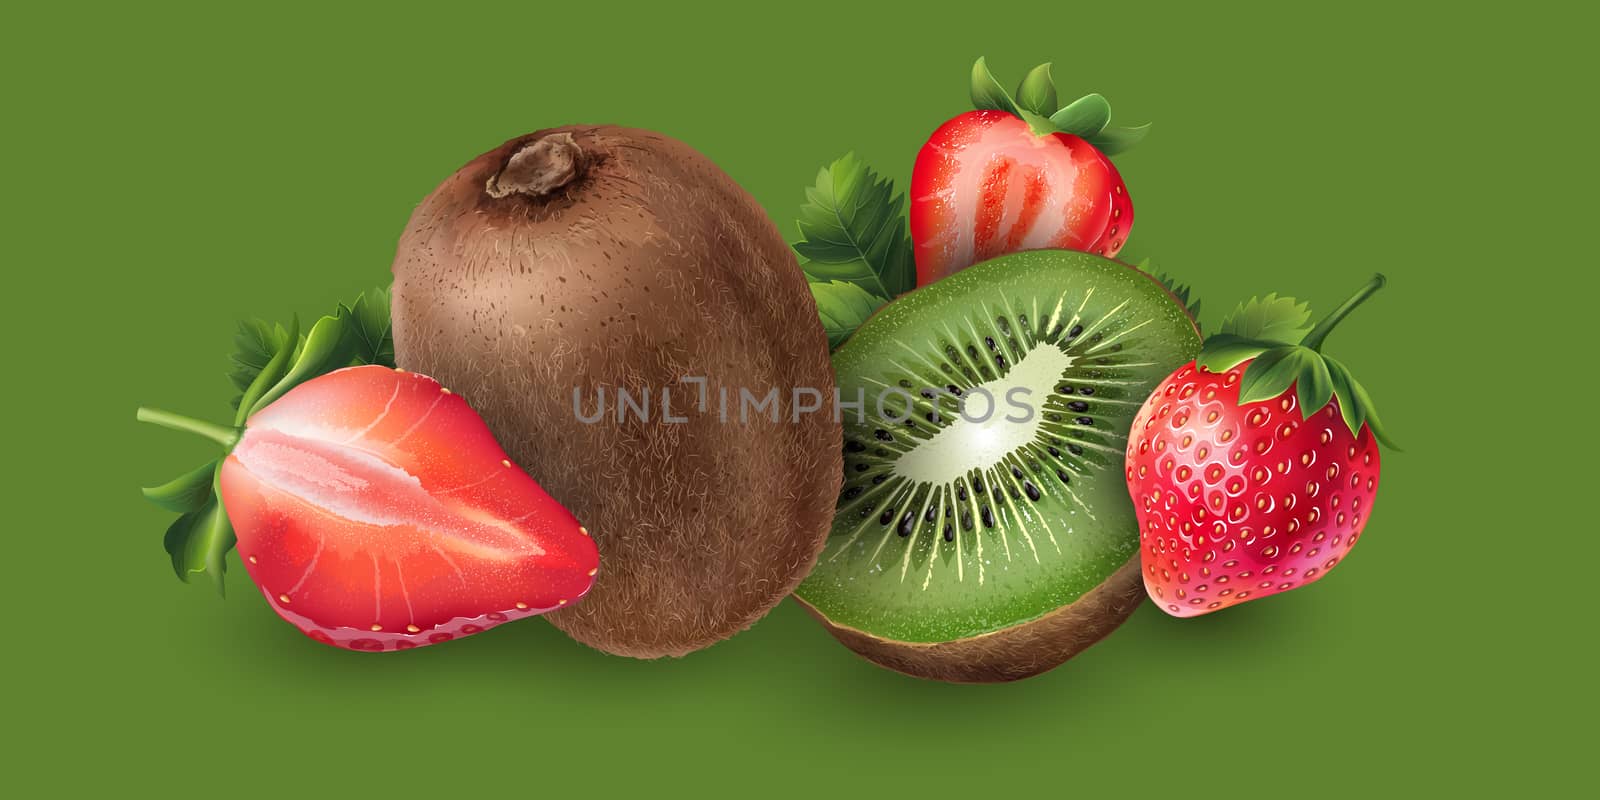 Strawberry and kiwi on green background.